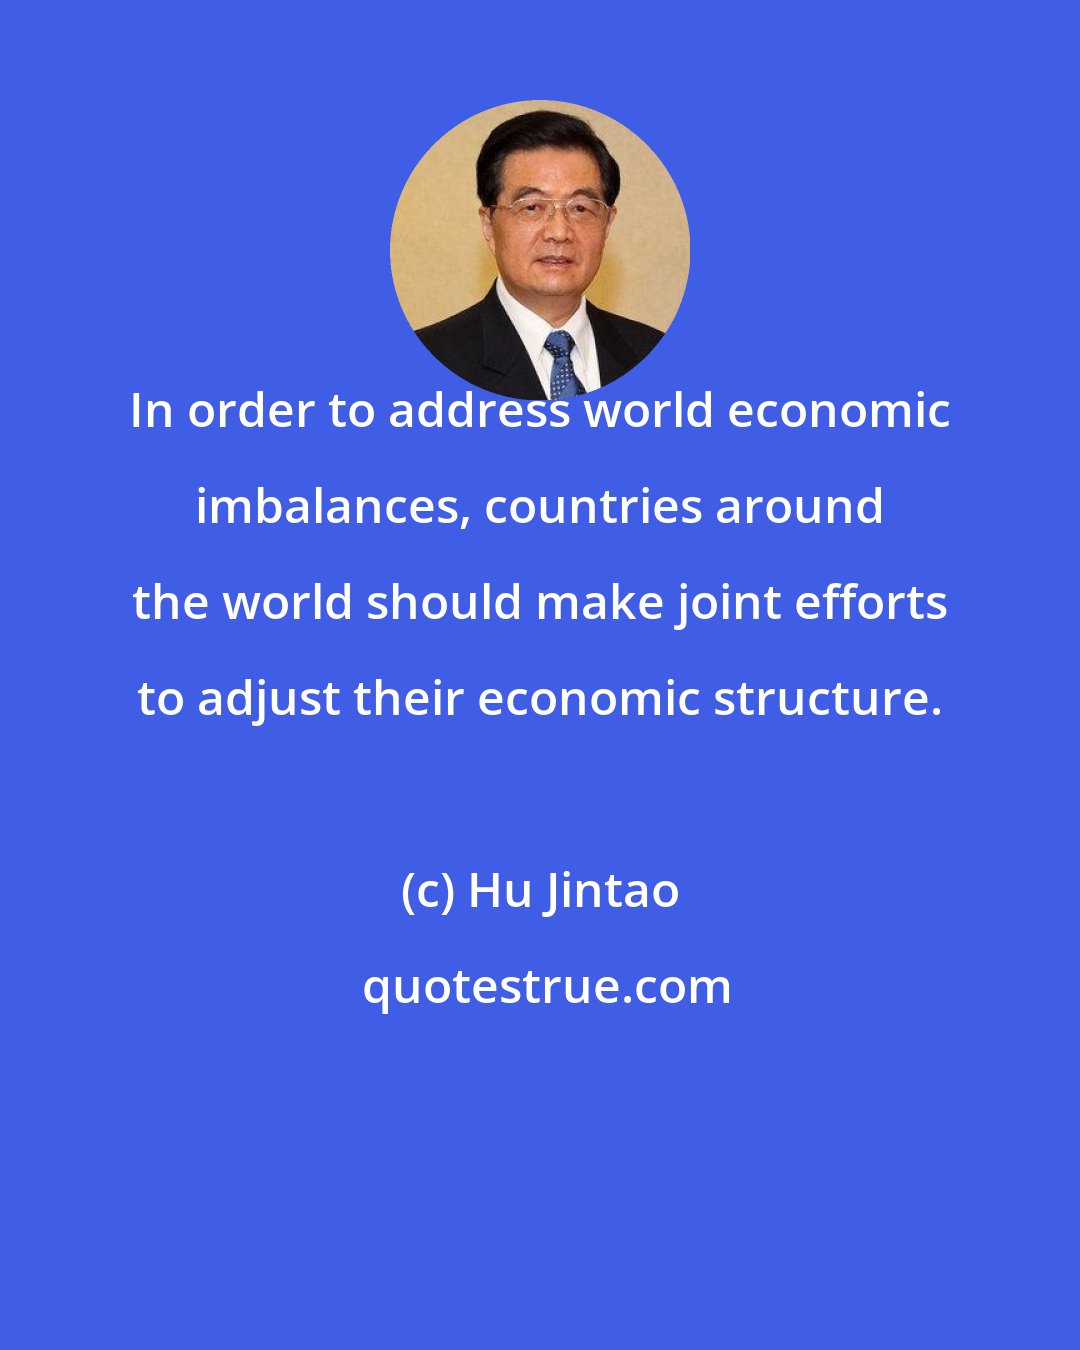 Hu Jintao: In order to address world economic imbalances, countries around the world should make joint efforts to adjust their economic structure.